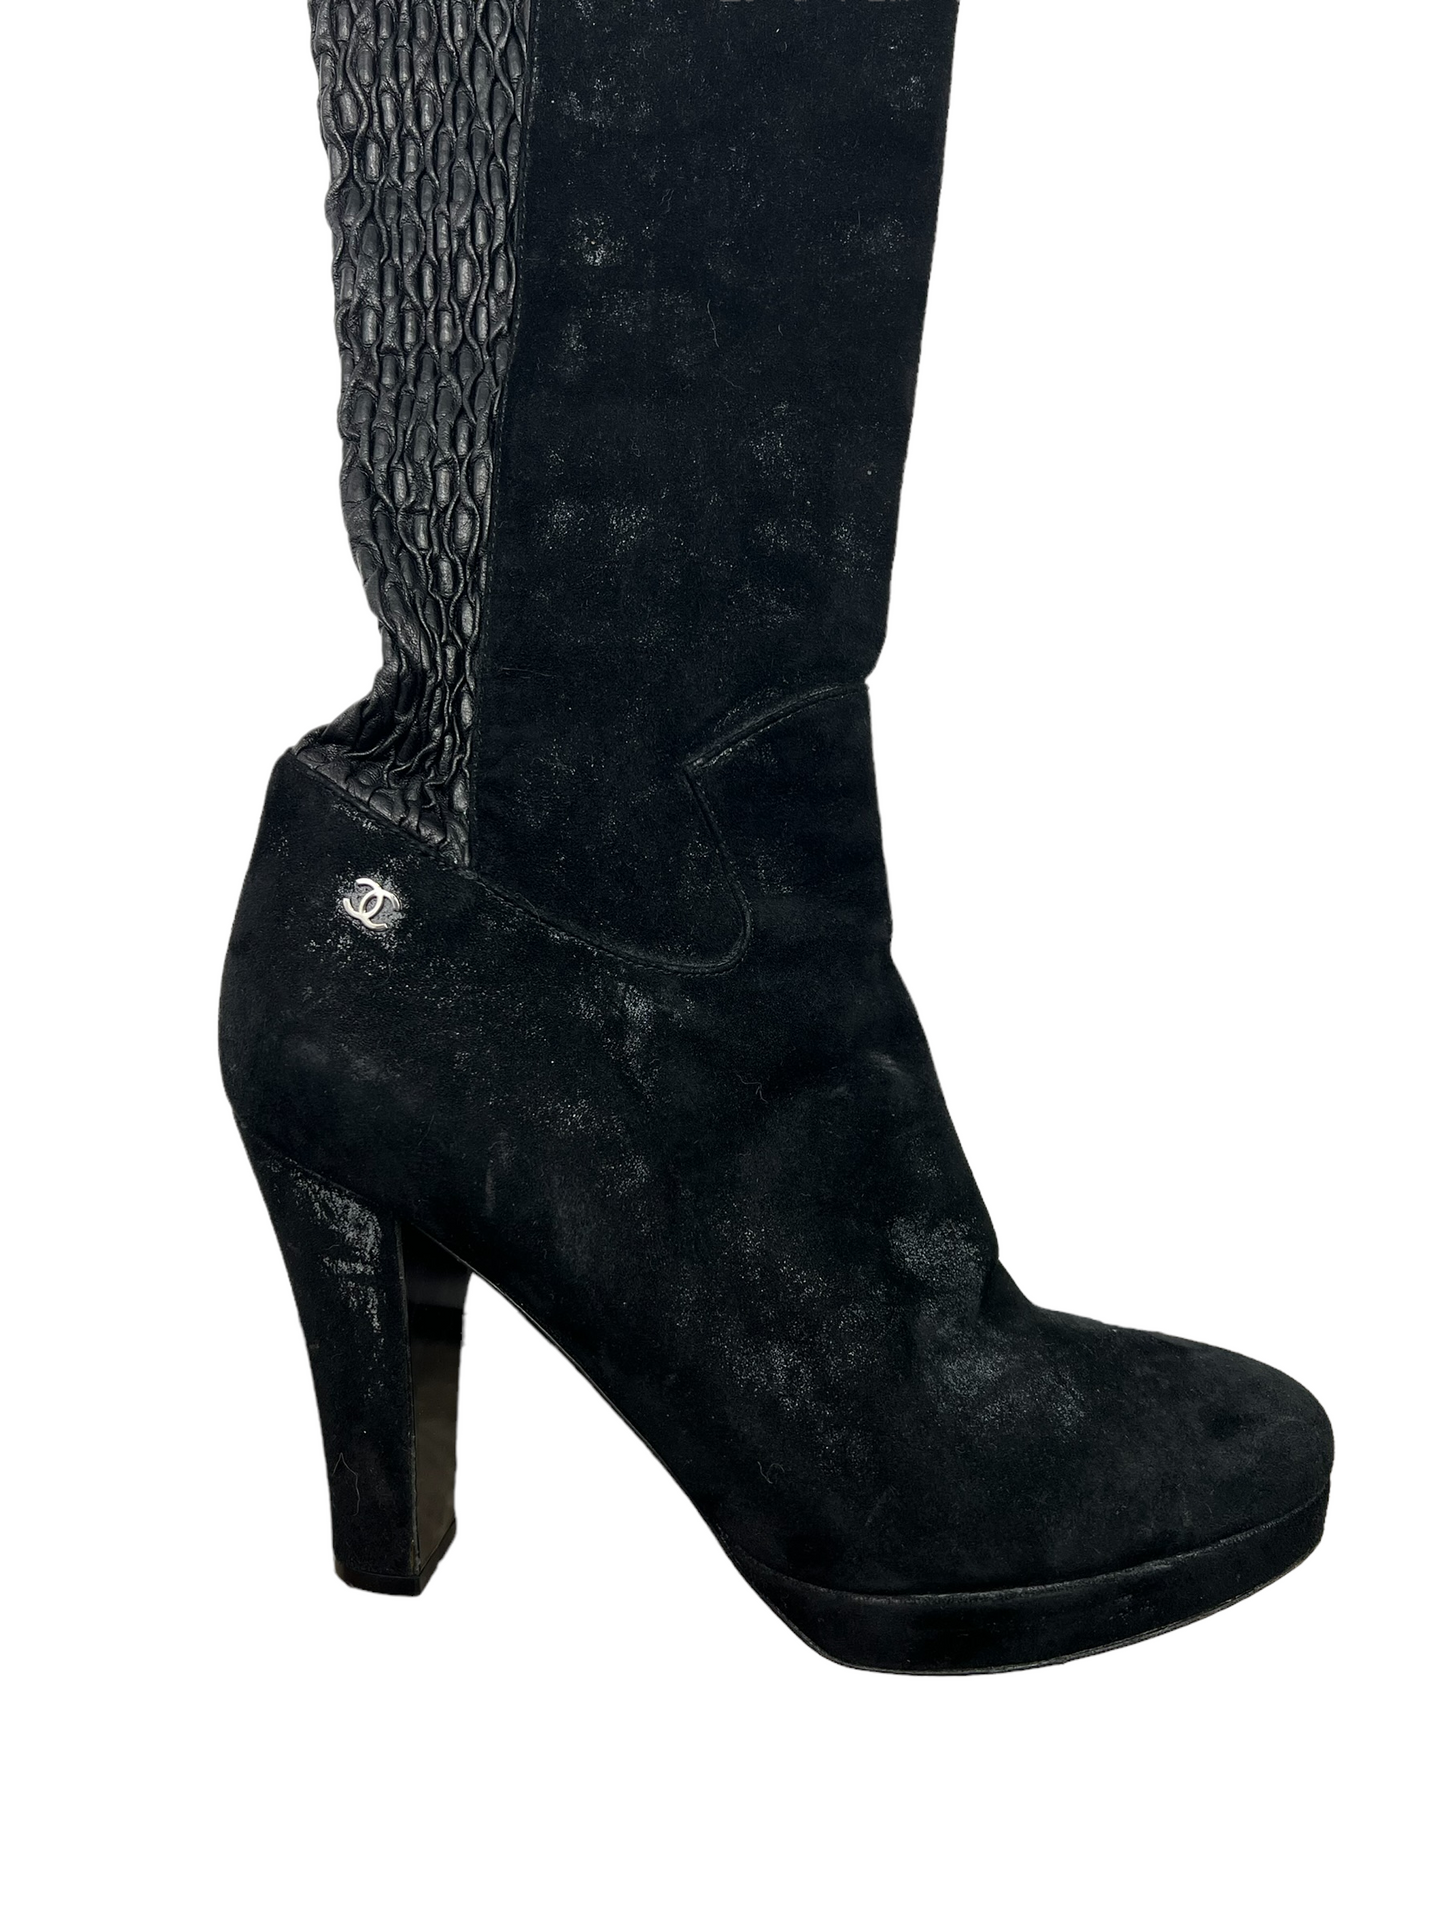 Chanel Thigh High Suede Lambskin Size 39 Boots